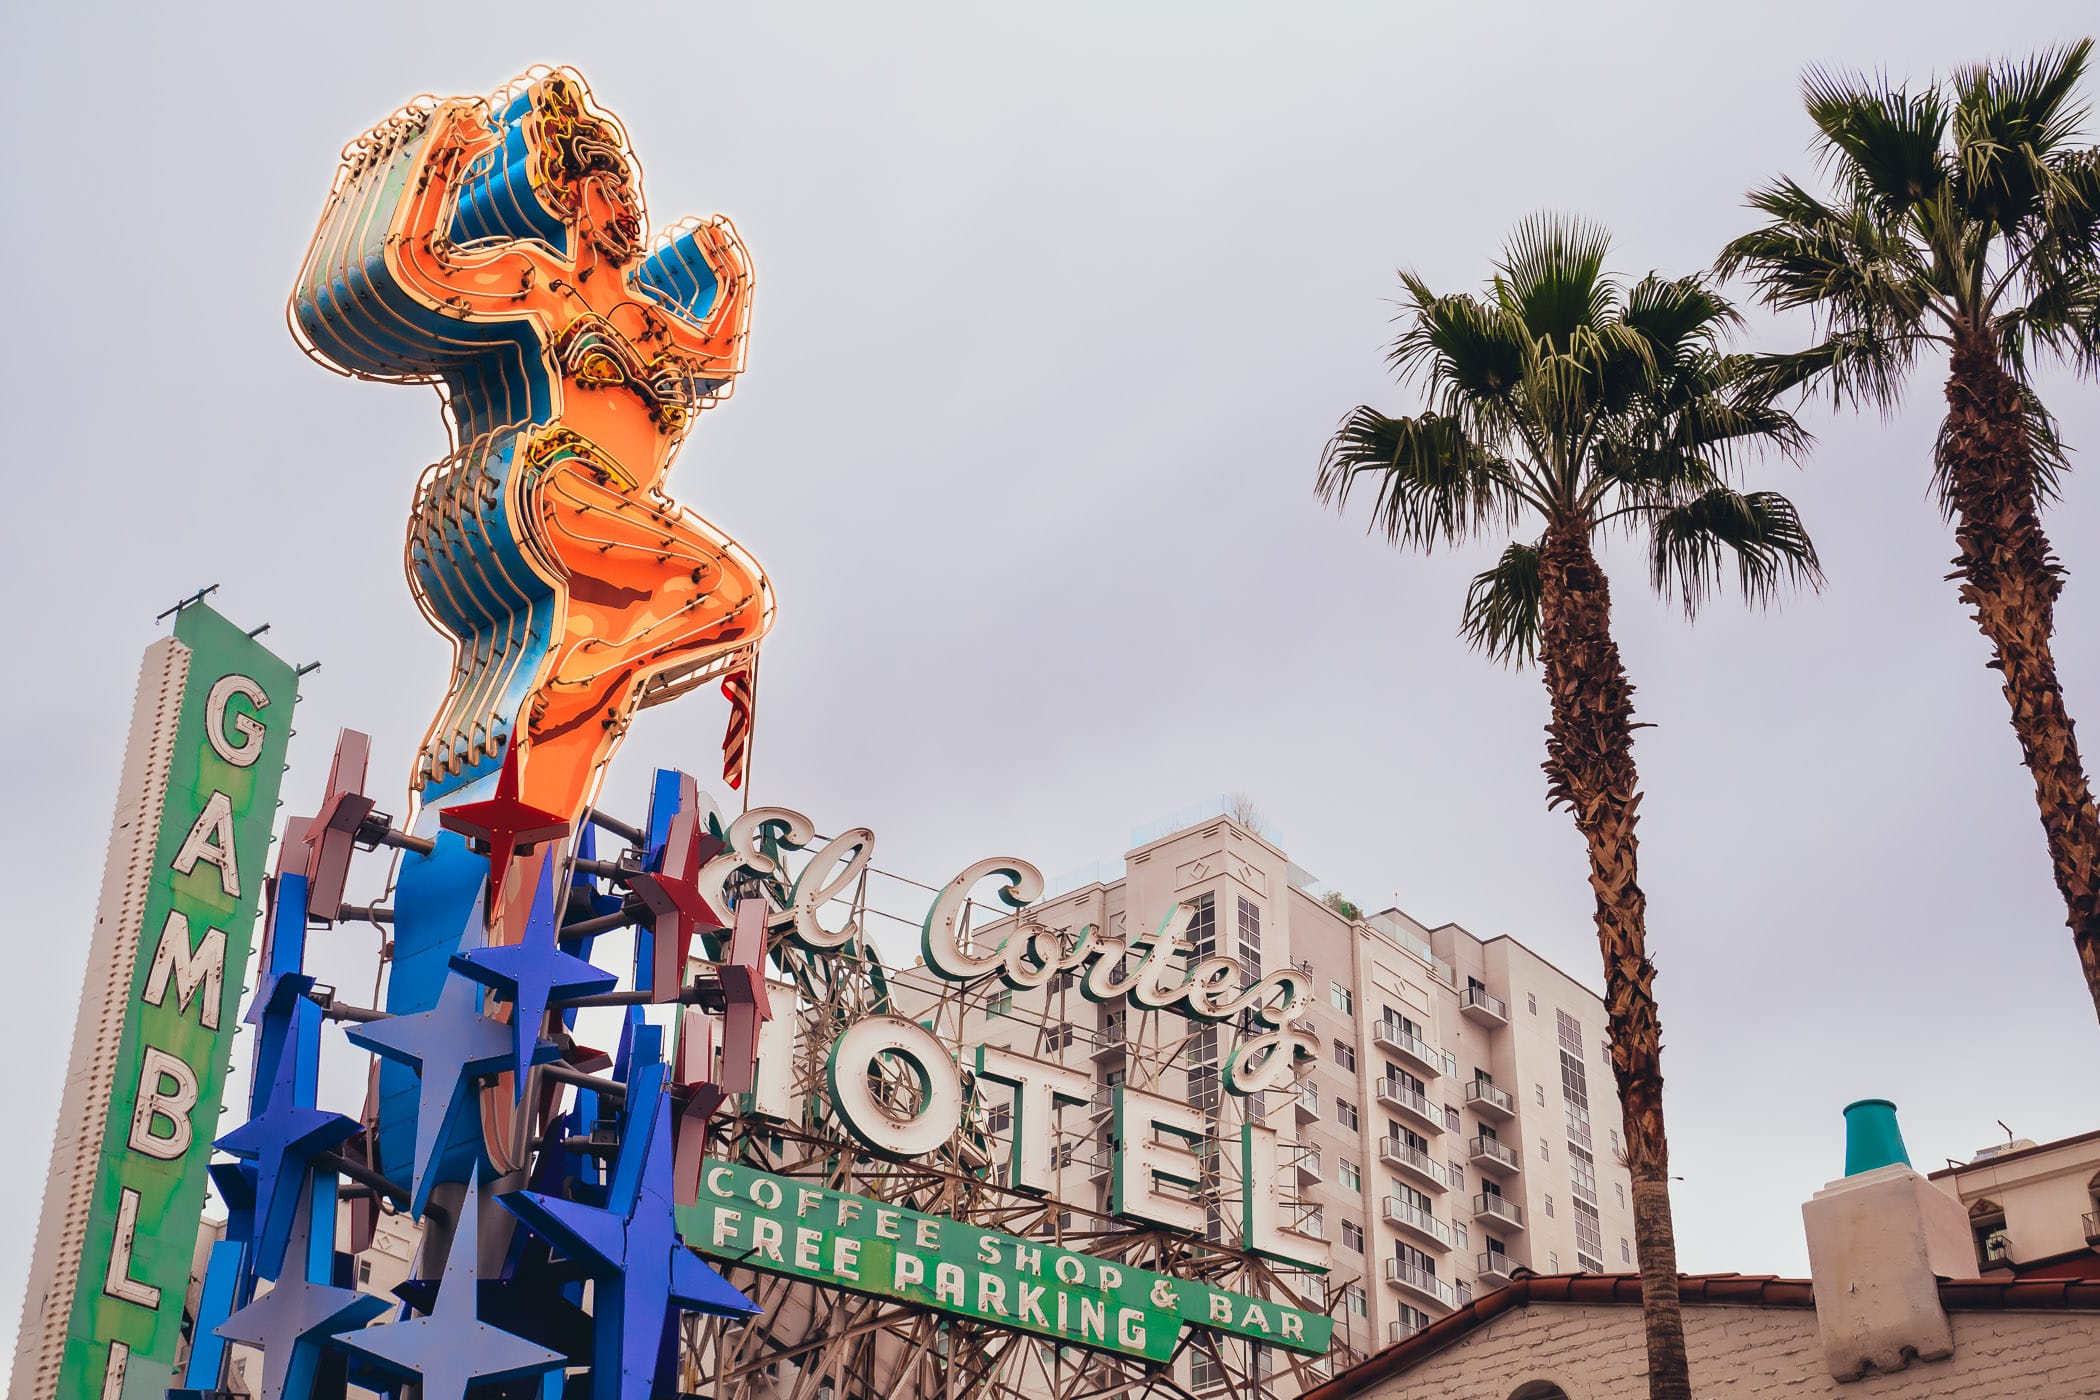 The sign for the El Cortez Hotel & Casino in Downtown Las Vegas.